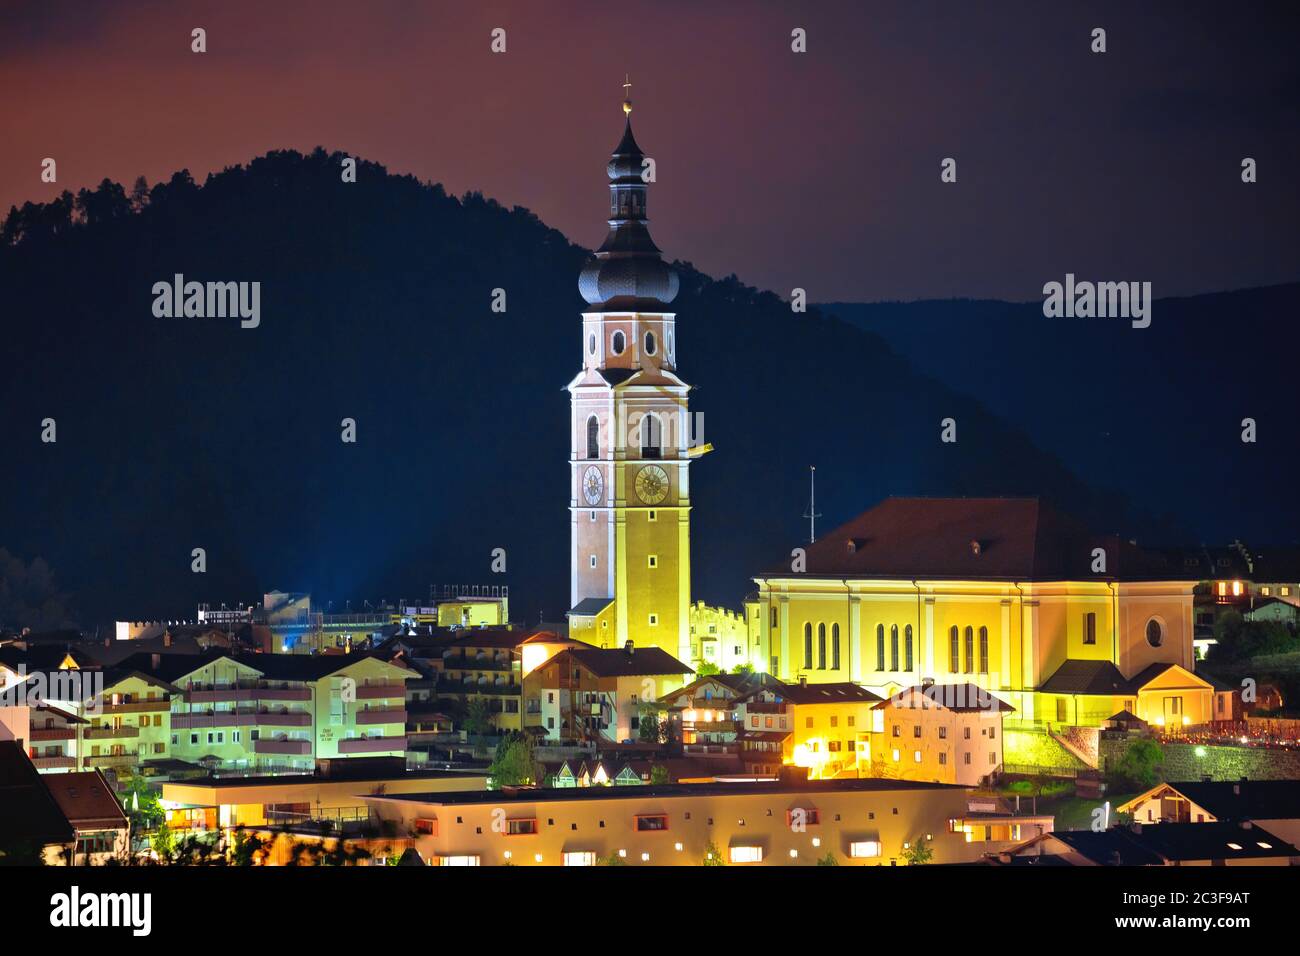 Town of church Kastelruth tower and skyline evening view Stock Photo